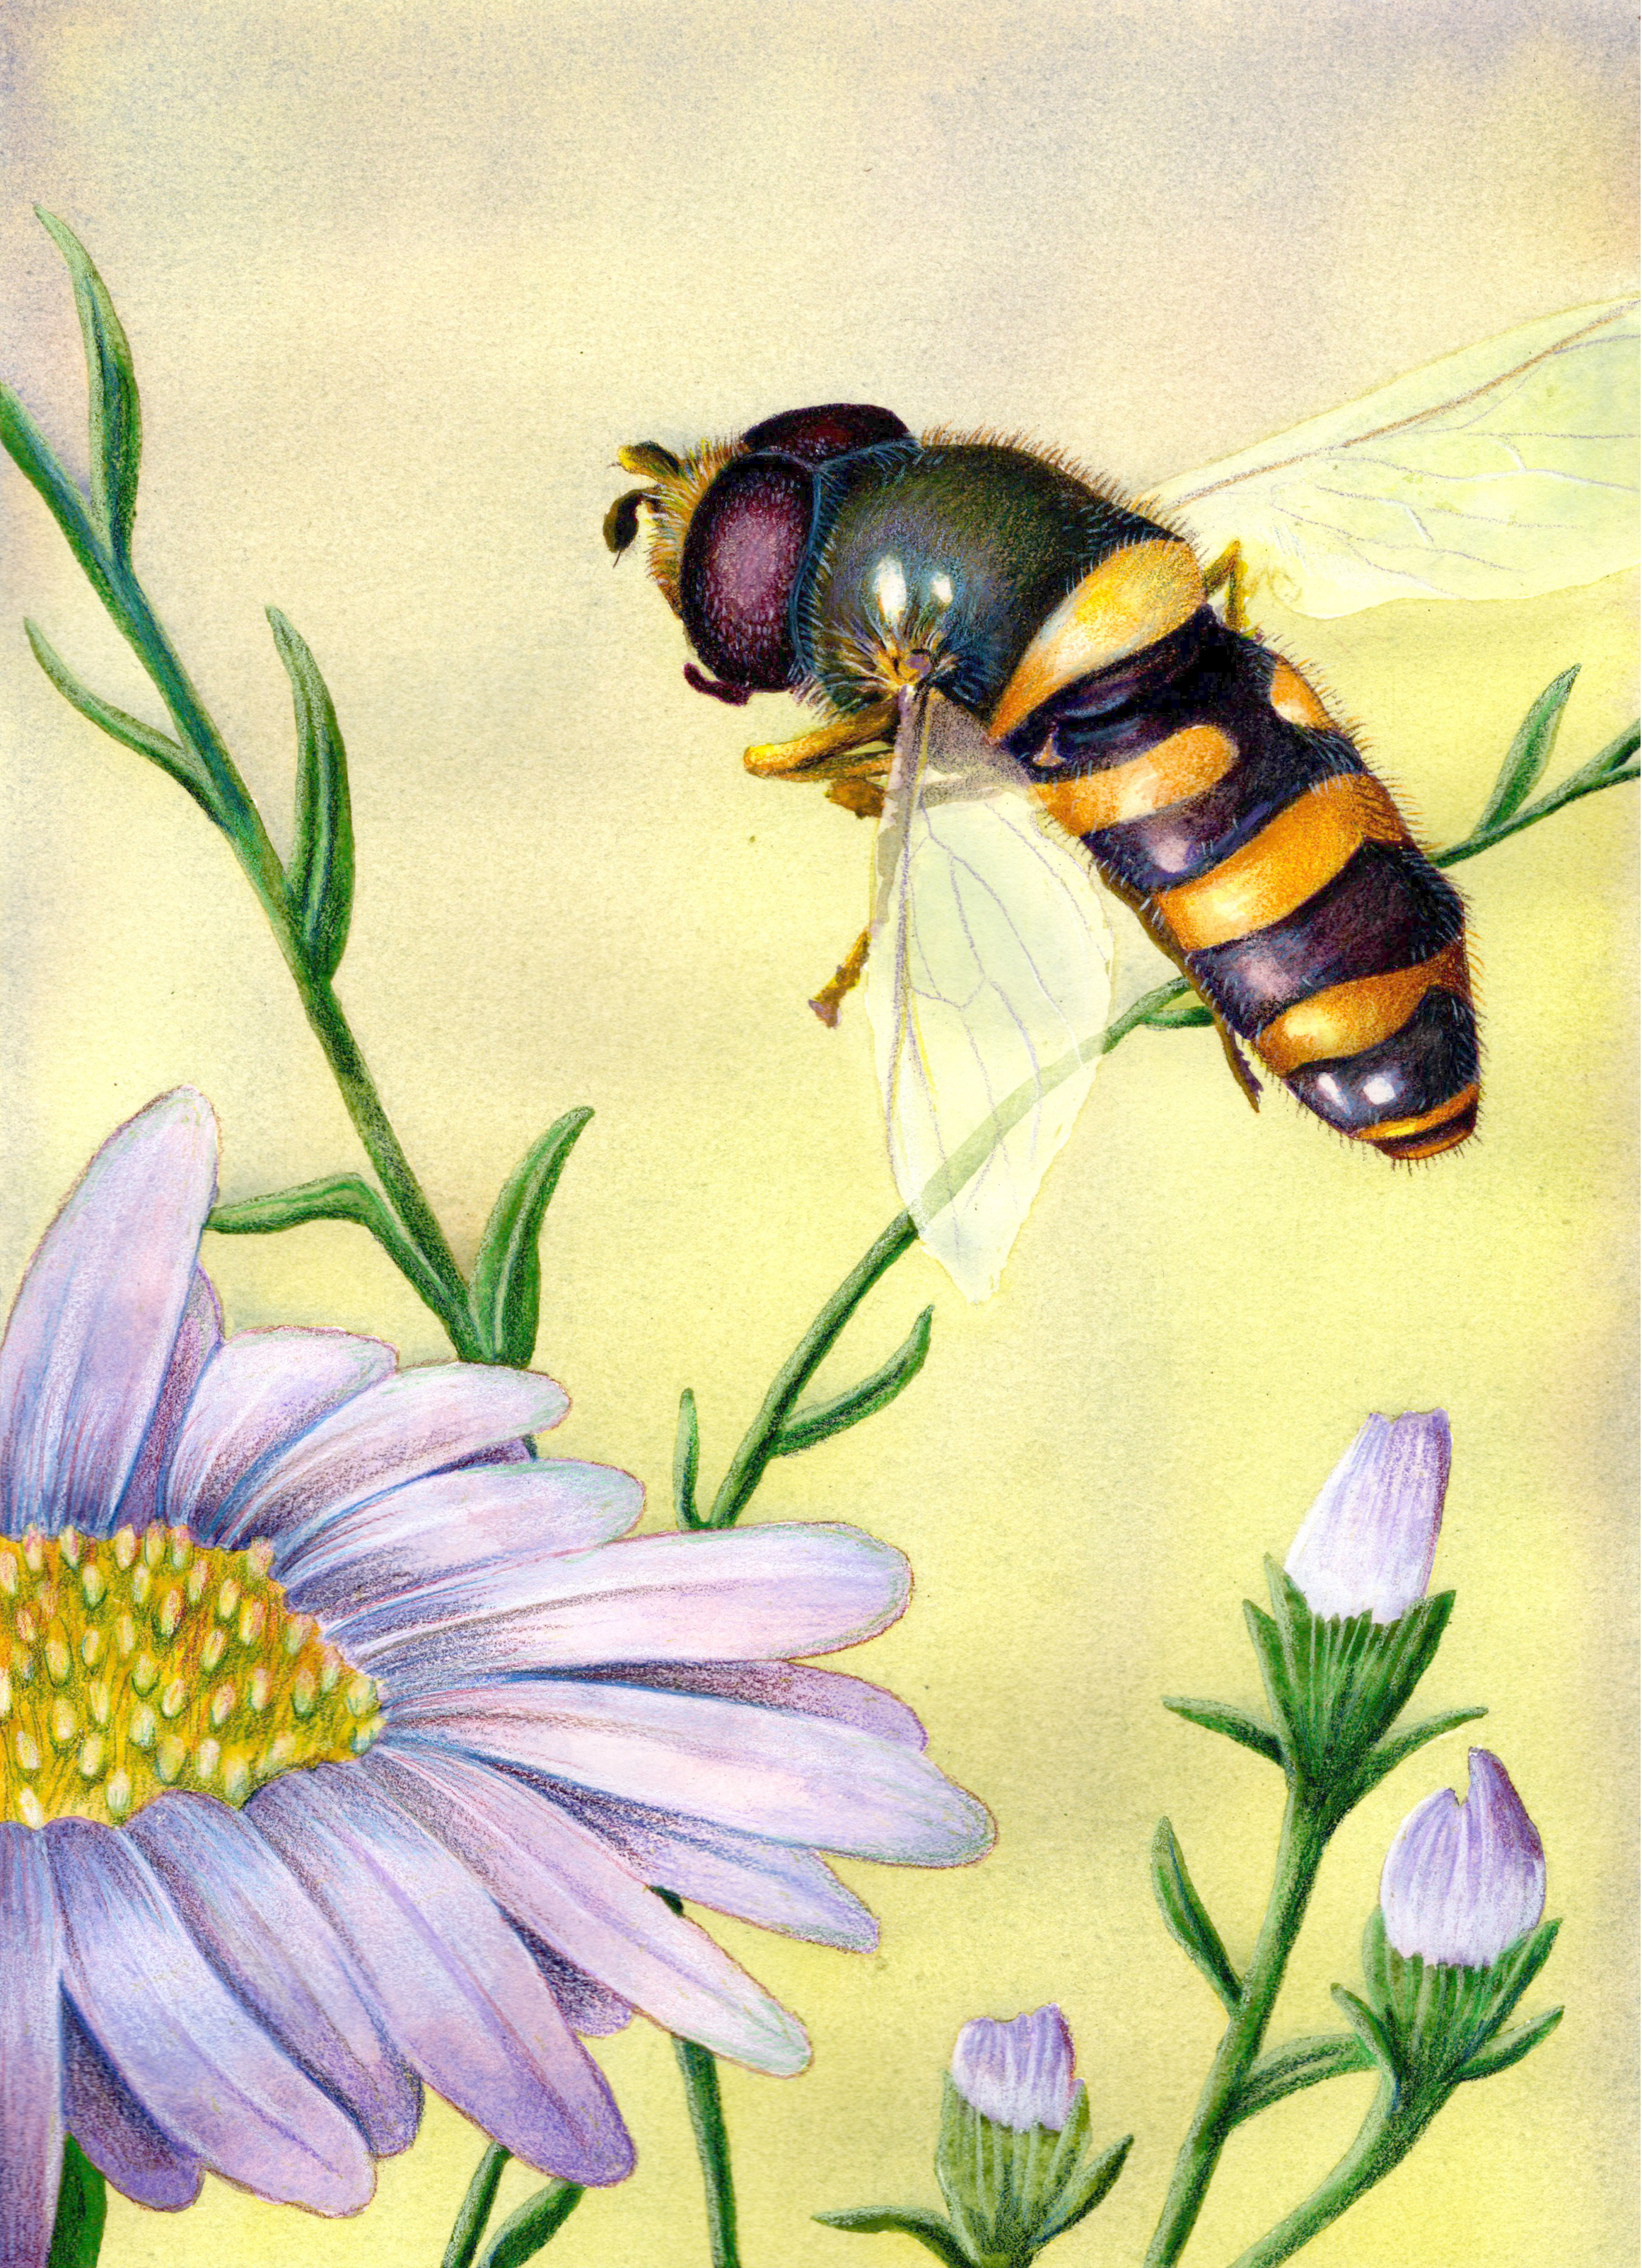 Hoverfly (biomimicry diptych)